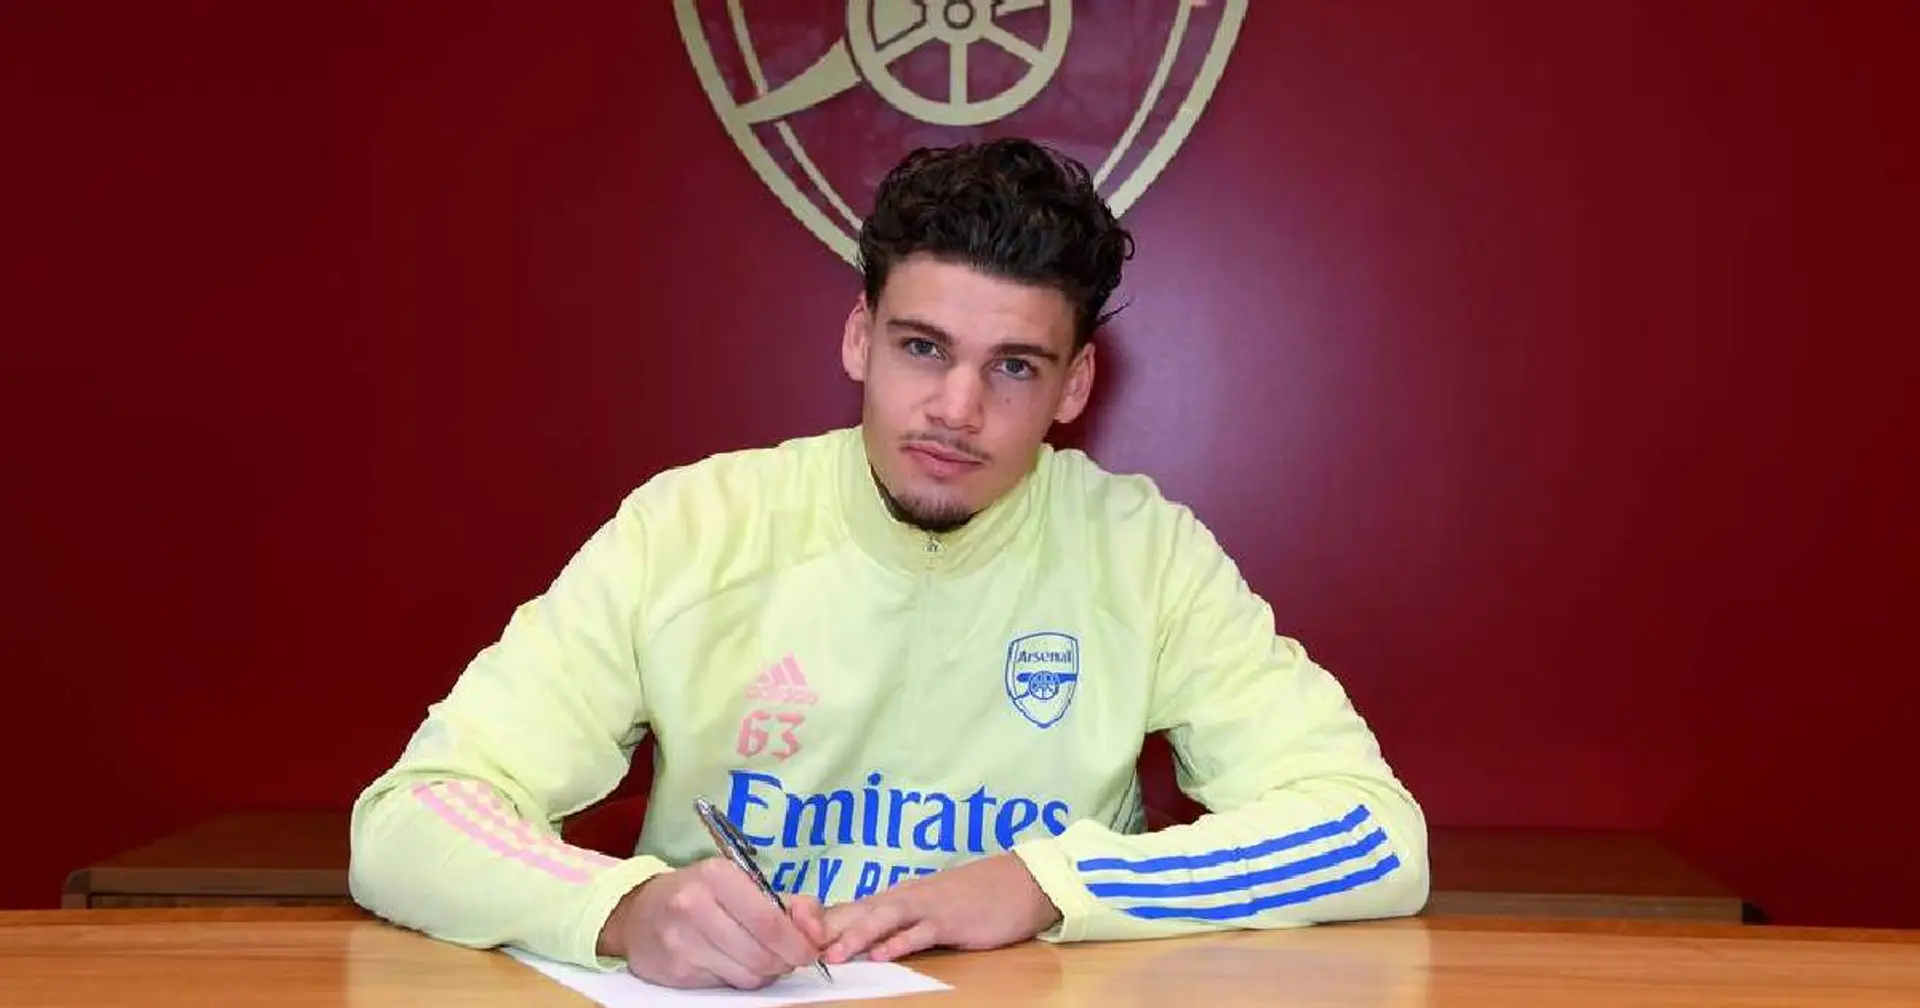 'When Arsenal is interested, you don't need to think twice': Omar Rekik explains his strengths and why he chose to join Gunners